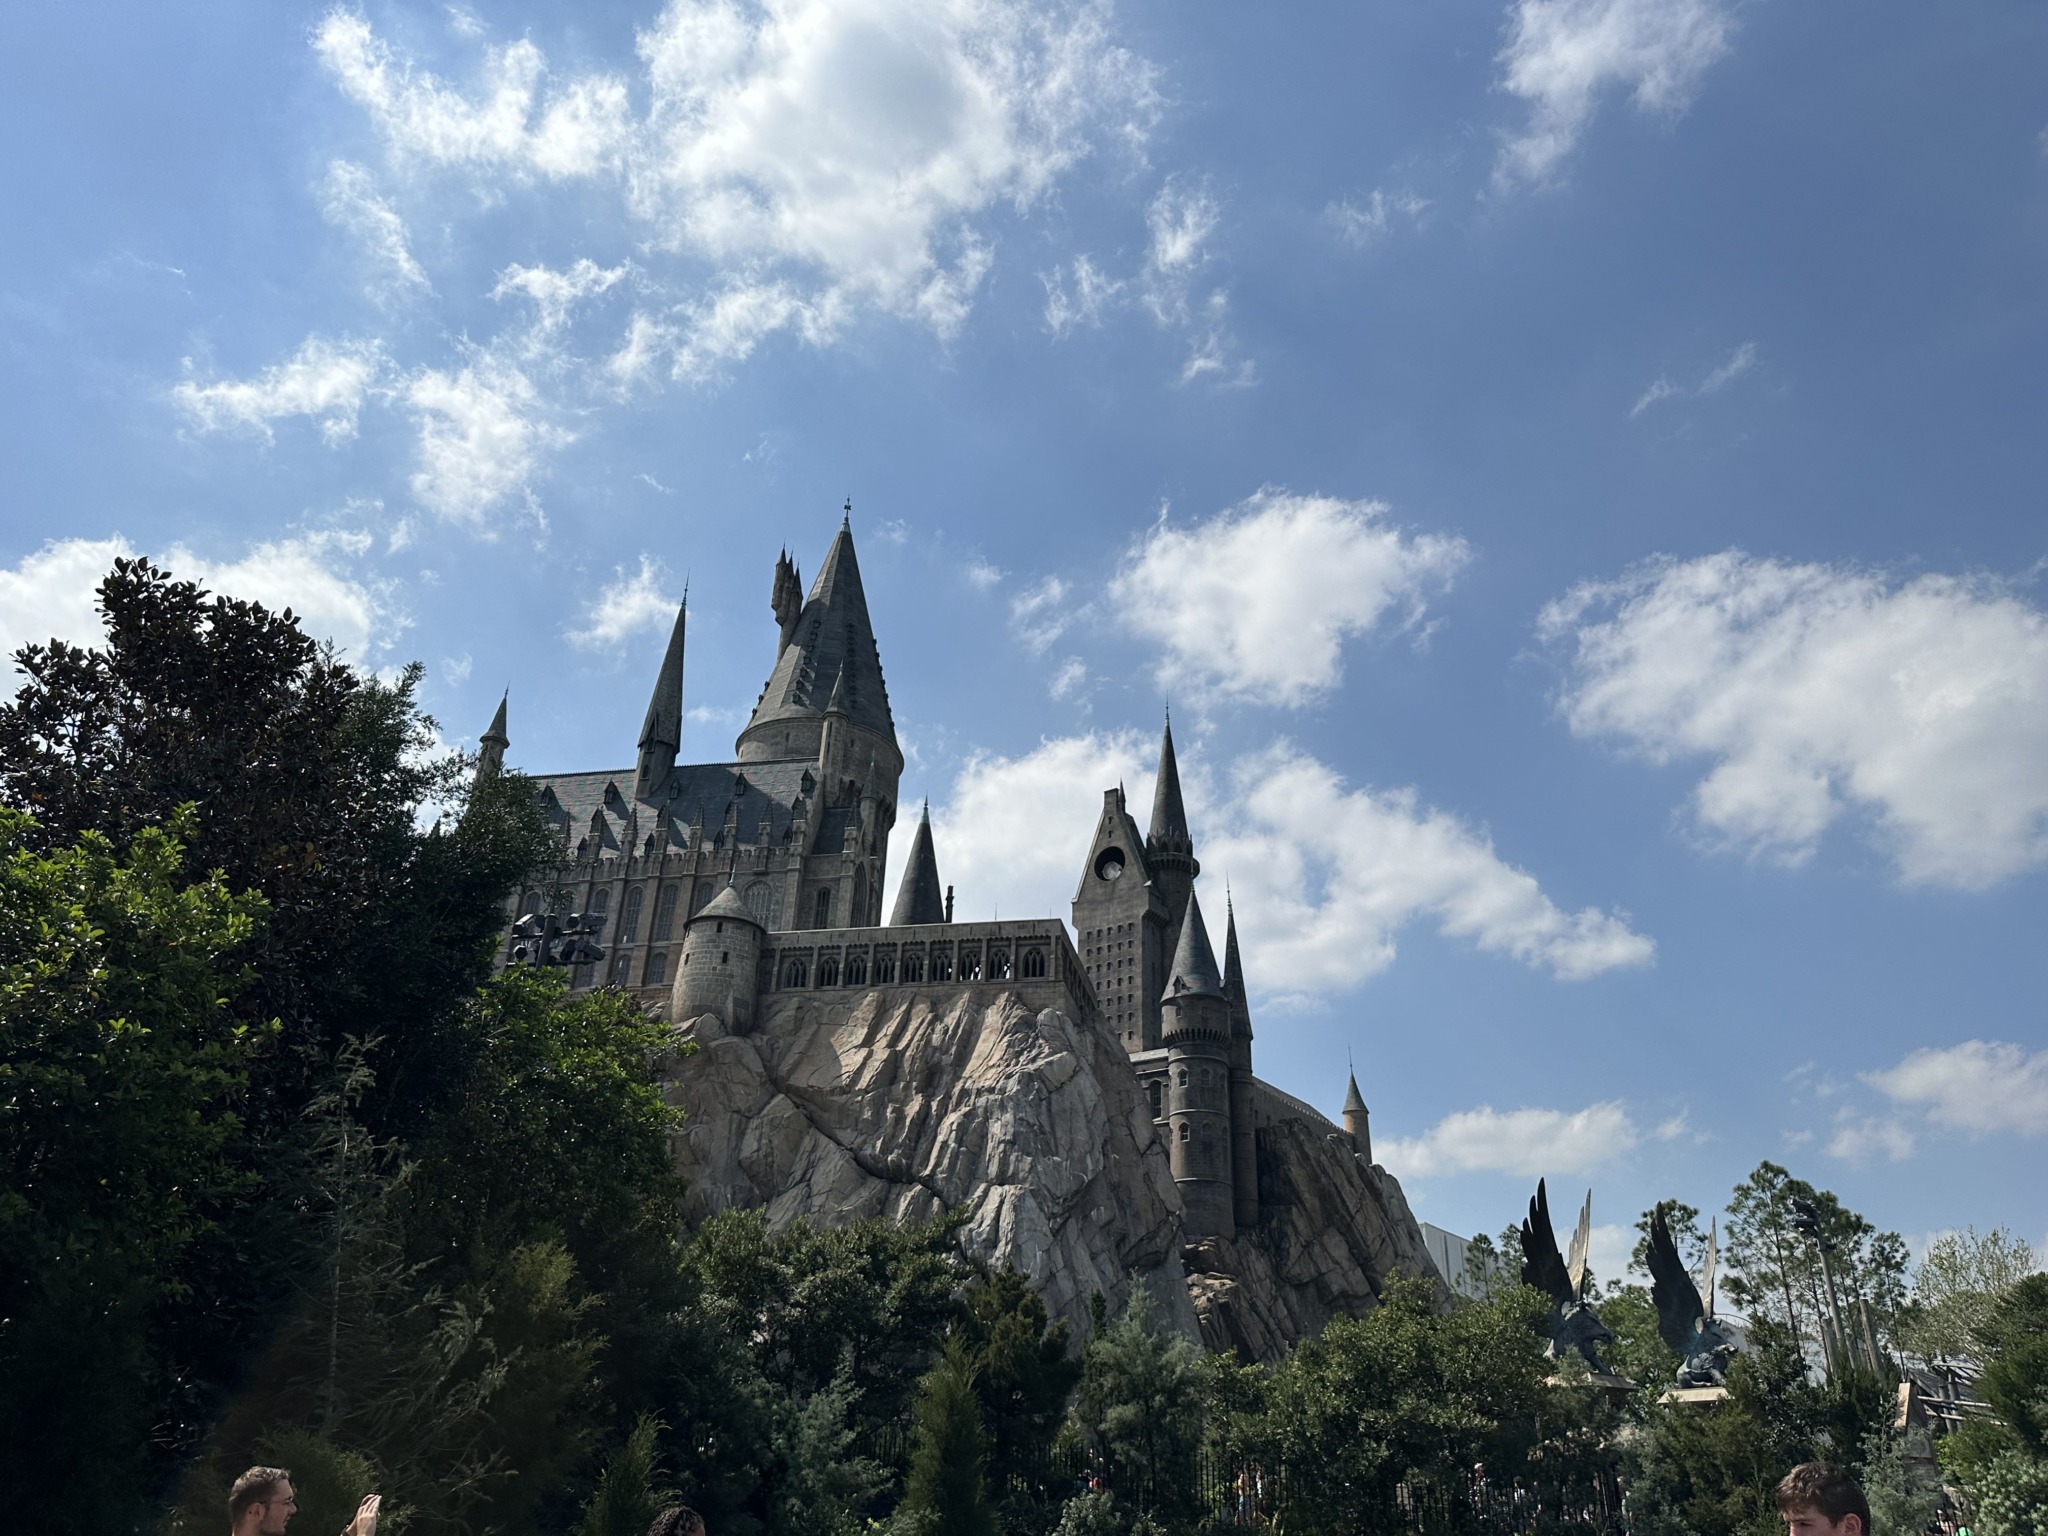 Is there a real Hogwarts school?